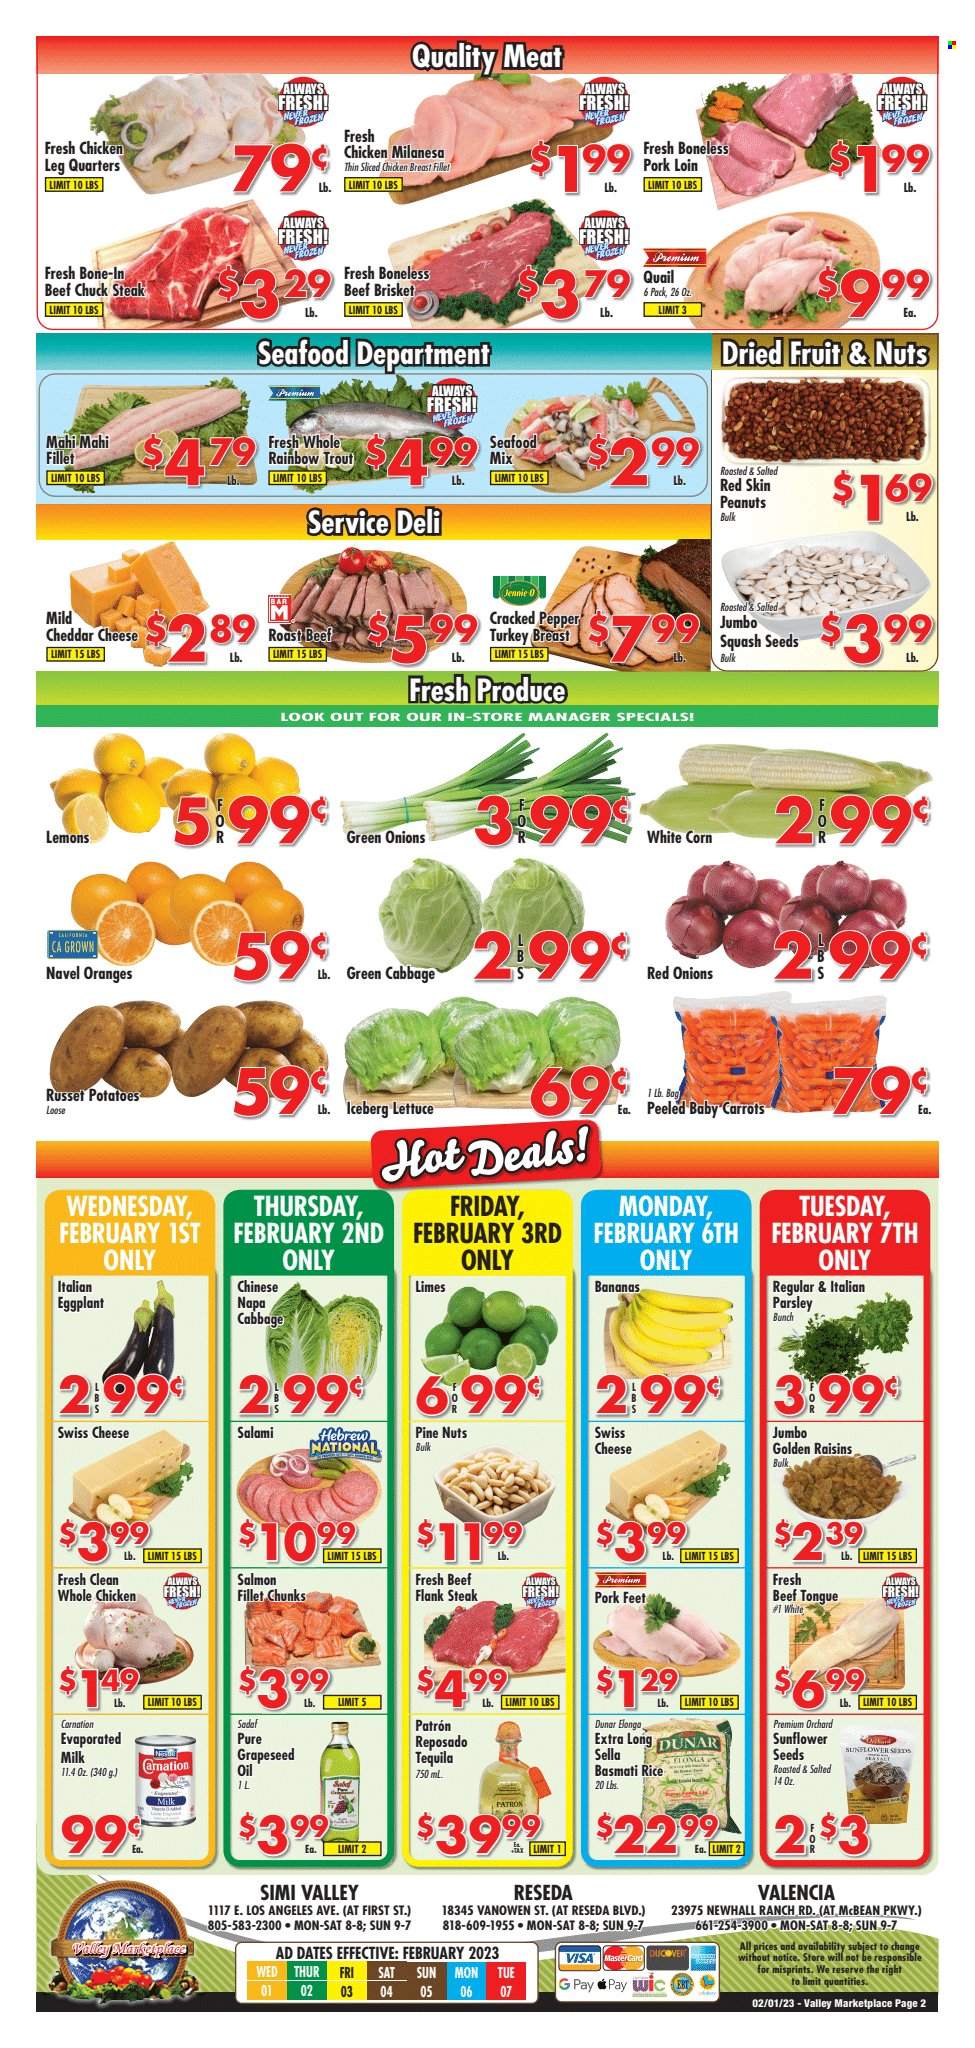 thumbnail - Valley Marketplace Flyer - 02/01/2023 - 02/07/2023 - Sales products - cabbage, carrots, corn, red onions, russet potatoes, potatoes, parsley, lettuce, eggplant, green onion, bananas, limes, oranges, mahi mahi, salmon, salmon fillet, trout, seafood, salami, mild cheddar, swiss cheese, cheddar, cheese, evaporated milk, basmati rice, rice, oil, grape seed oil, raisins, pine nuts, peanuts, dried fruit, sunflower seeds, tequila, turkey breast, whole chicken, quail, chicken breasts, chicken legs, beef meat, steak, roast beef, chuck steak, beef brisket, flank steak, pork loin, pork meat, lemons, navel oranges. Page 2.